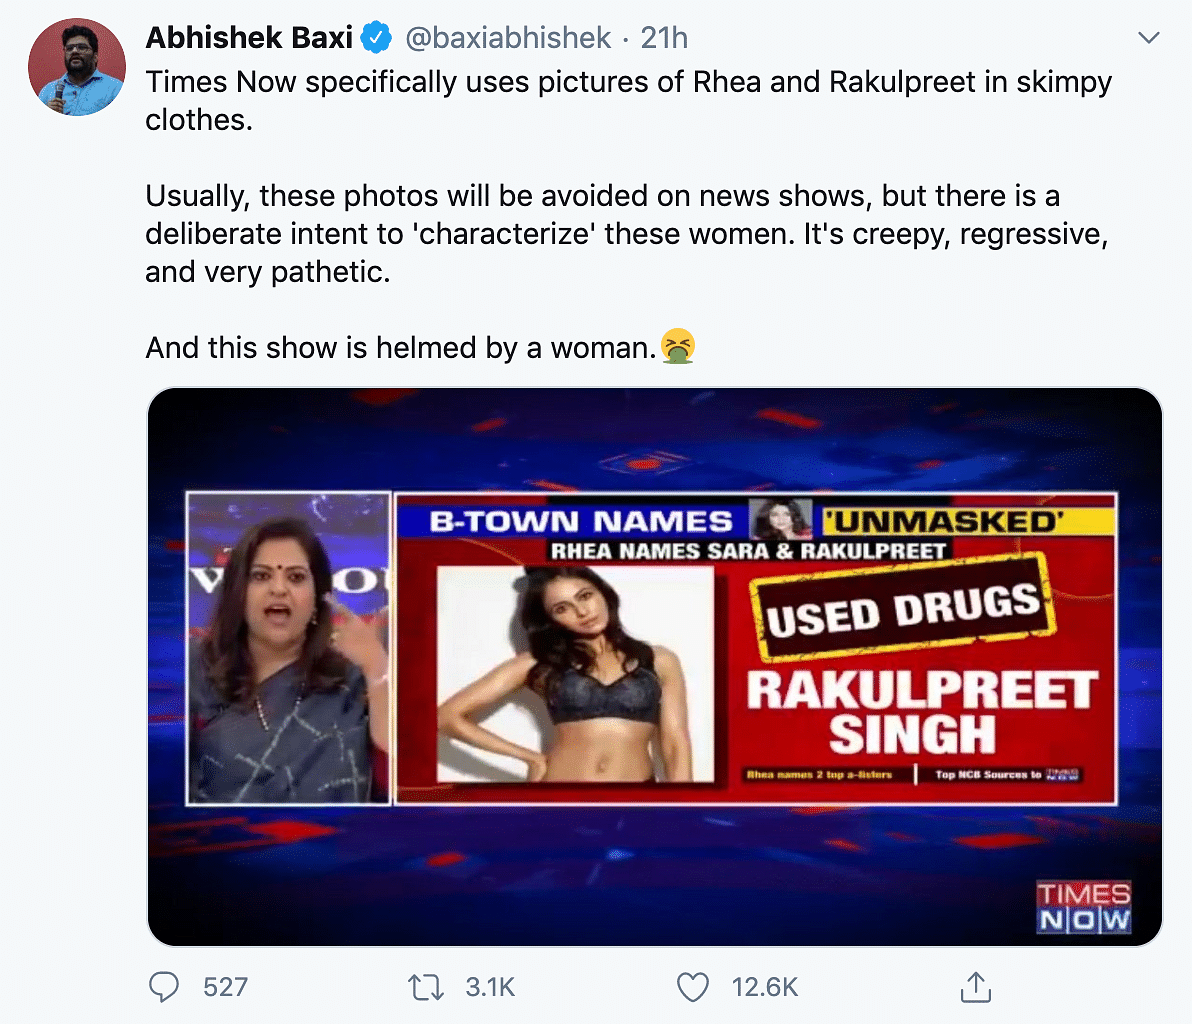 Twitter users question choice of image by Times Now that shows actor Rakulpreet Singh in a bikini on TV.